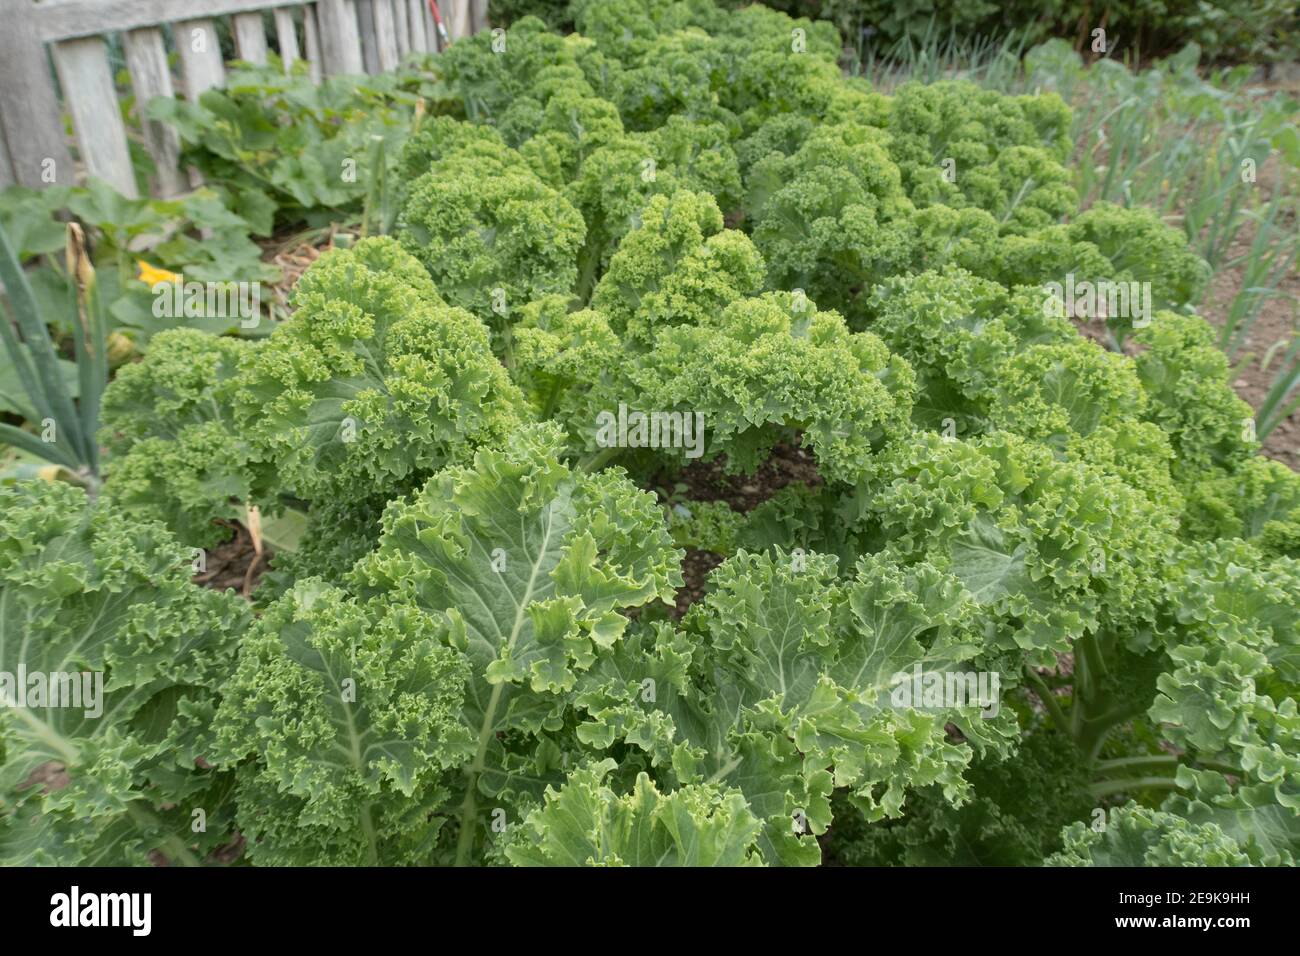 Crop of Autumn Home Grown Organic Dwarf Green Curled Kale (Brassica oleracea 'Acephala Group') Growing on an Allotment in a Vegetable Garden in Devon Stock Photo